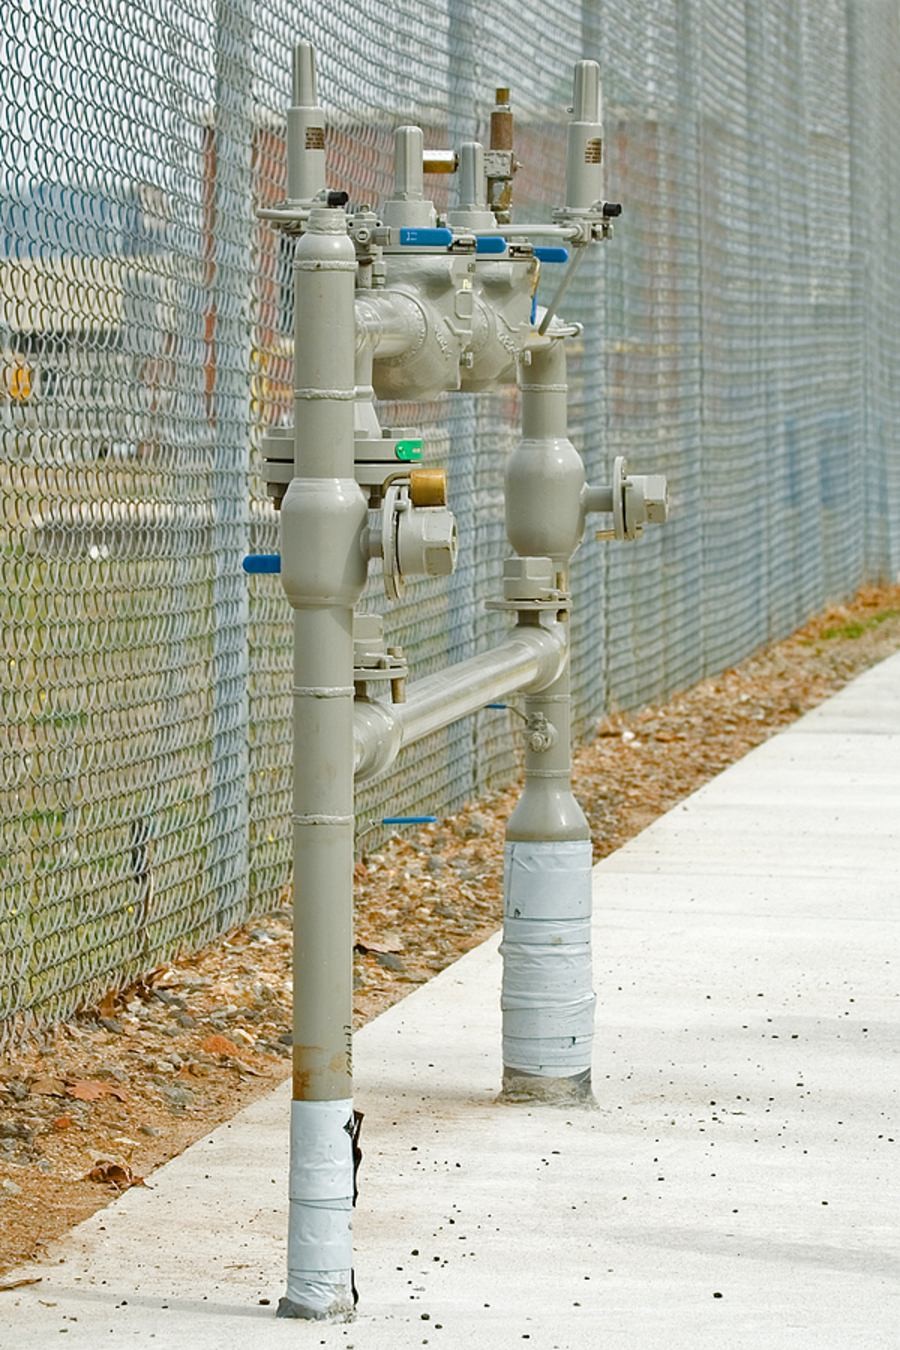 How a Sewer Backflow Preventer Works